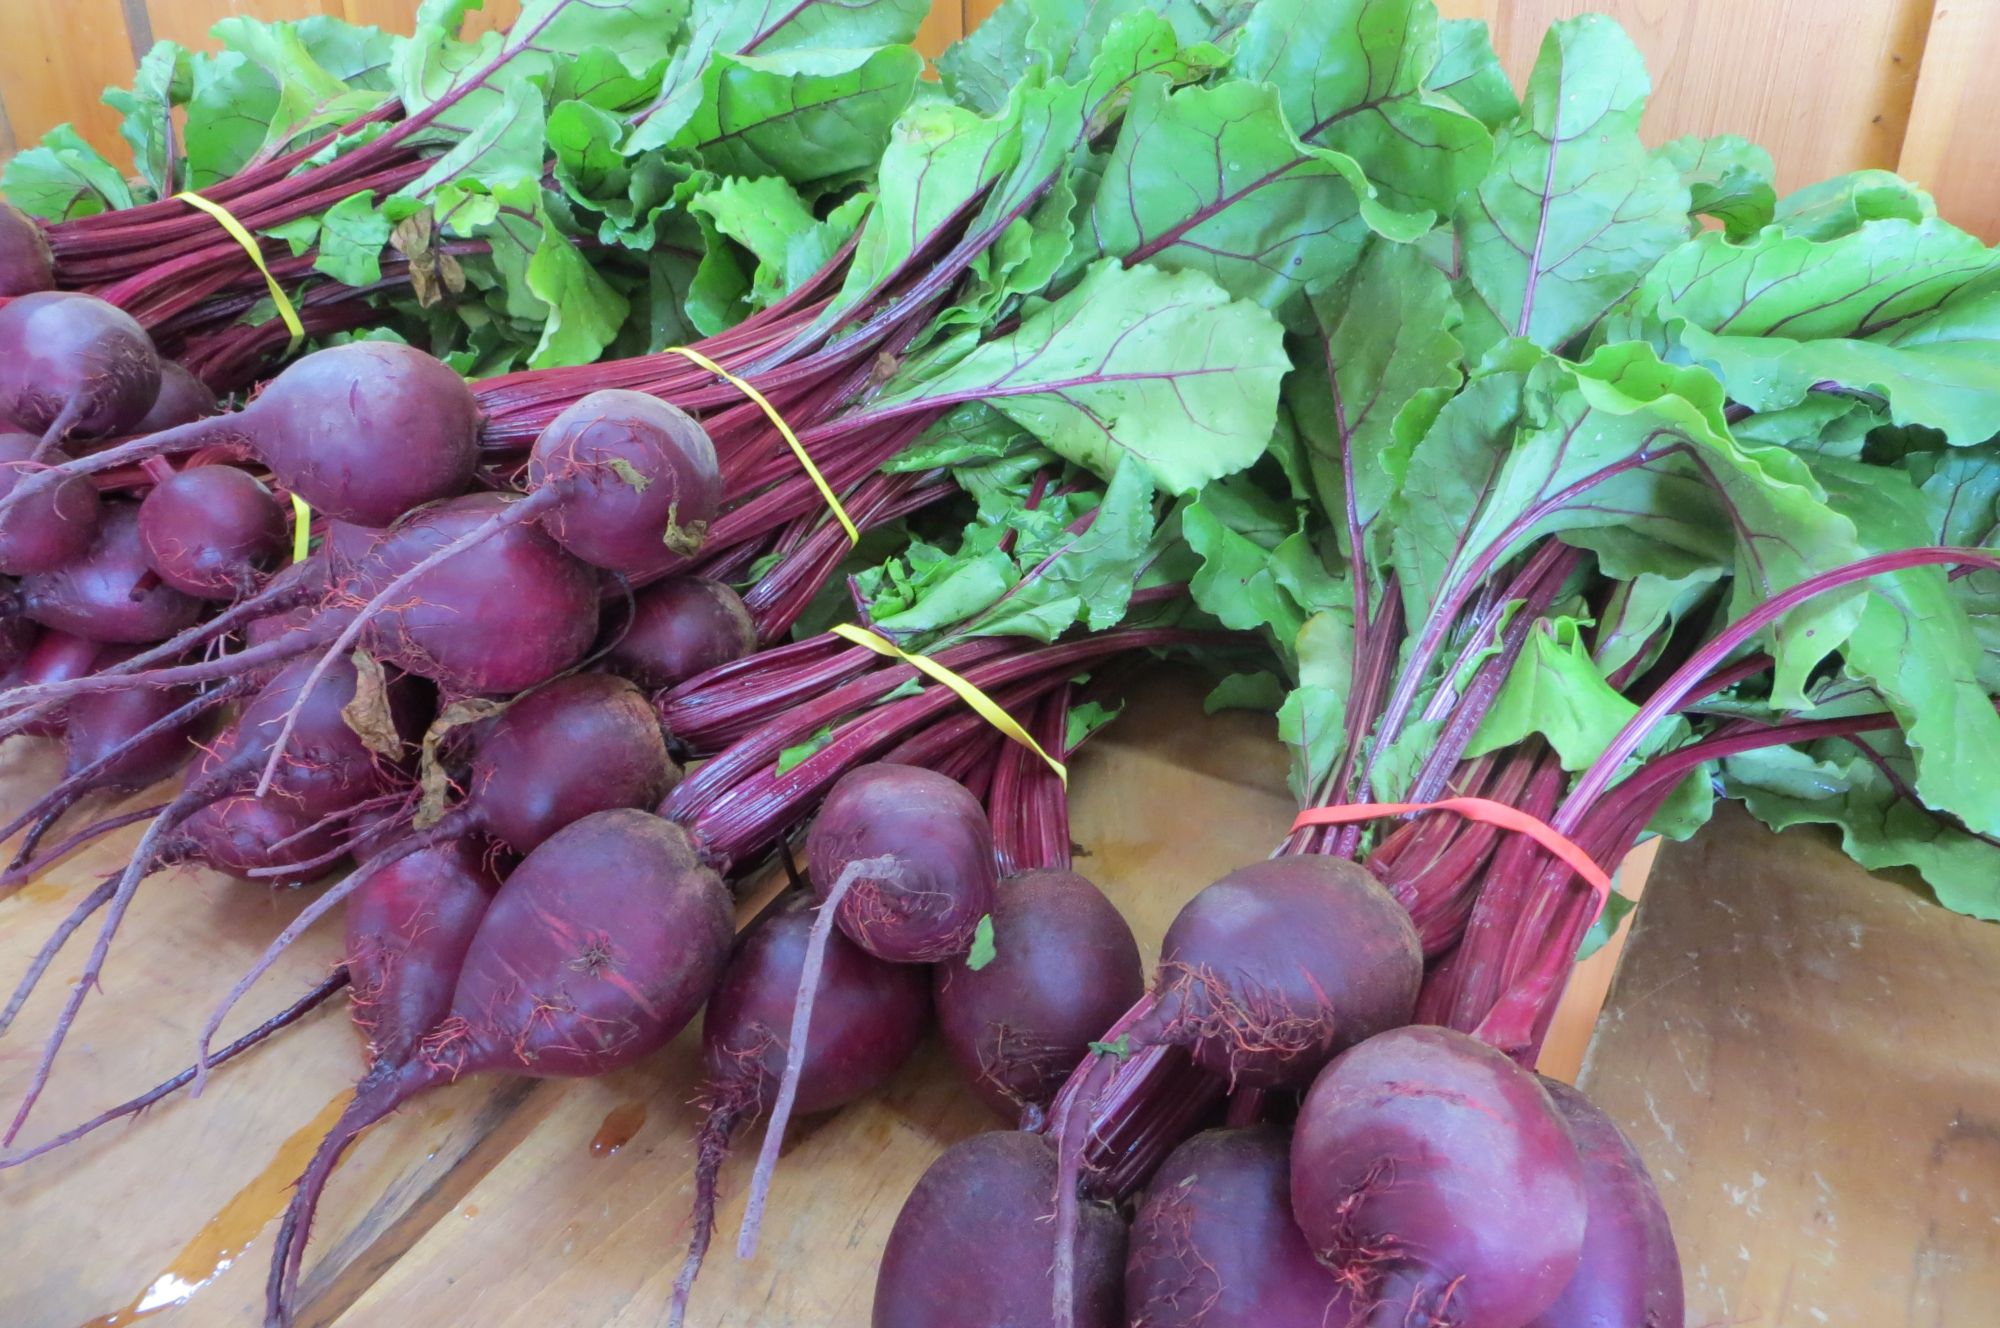 Beets: How to roast them